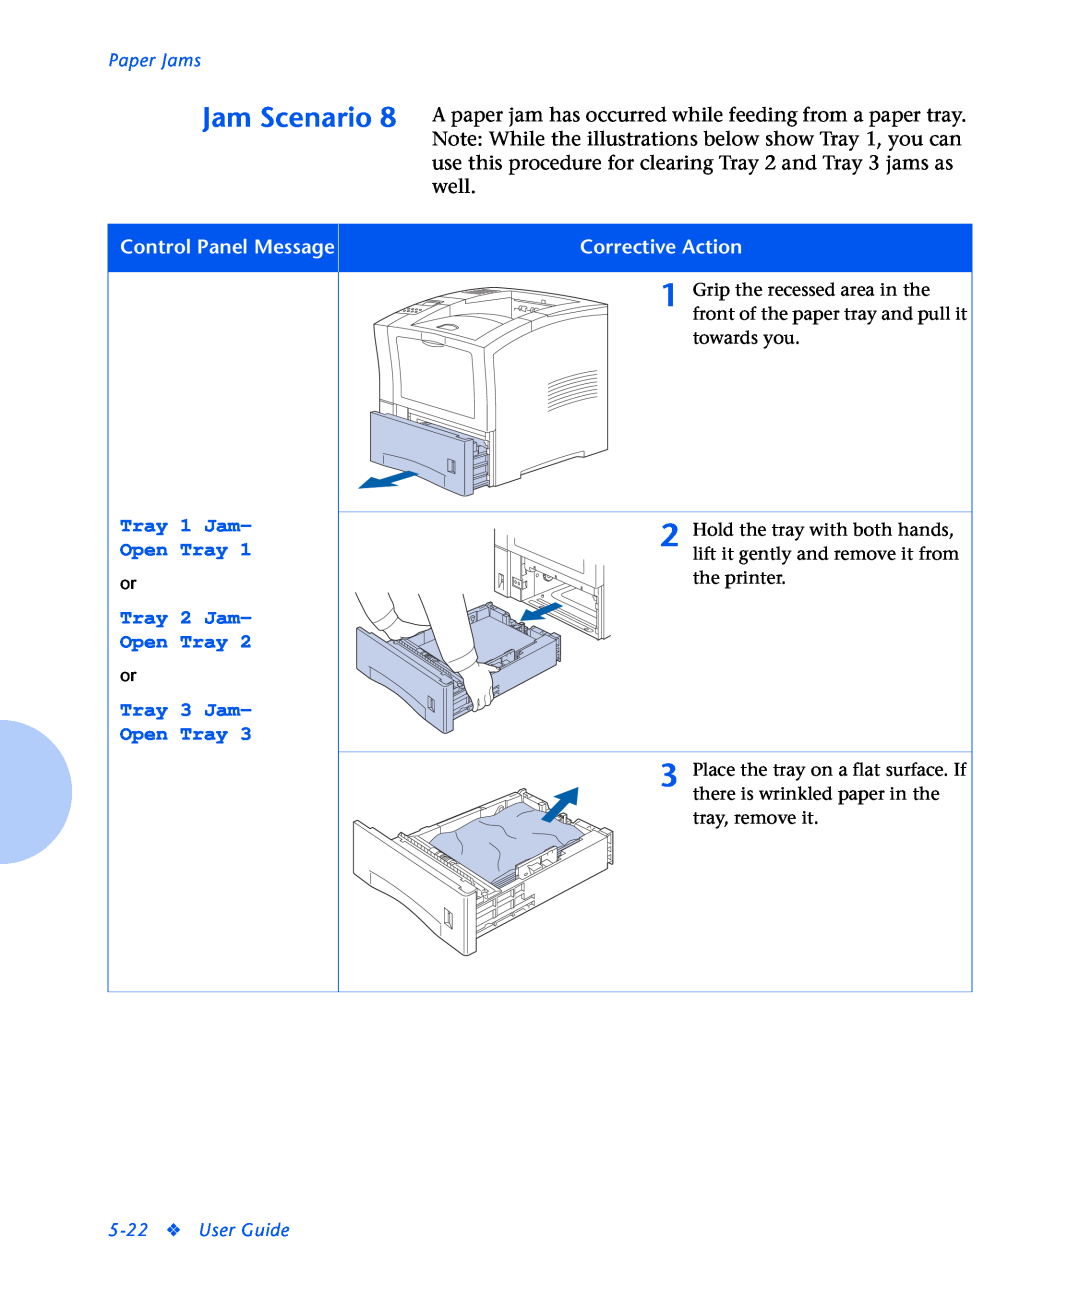 Xerox N2125 manual Jam Scenario, A paper jam has occurred while feeding from a paper tray, well, Tray 1 Jam- Open Tray 